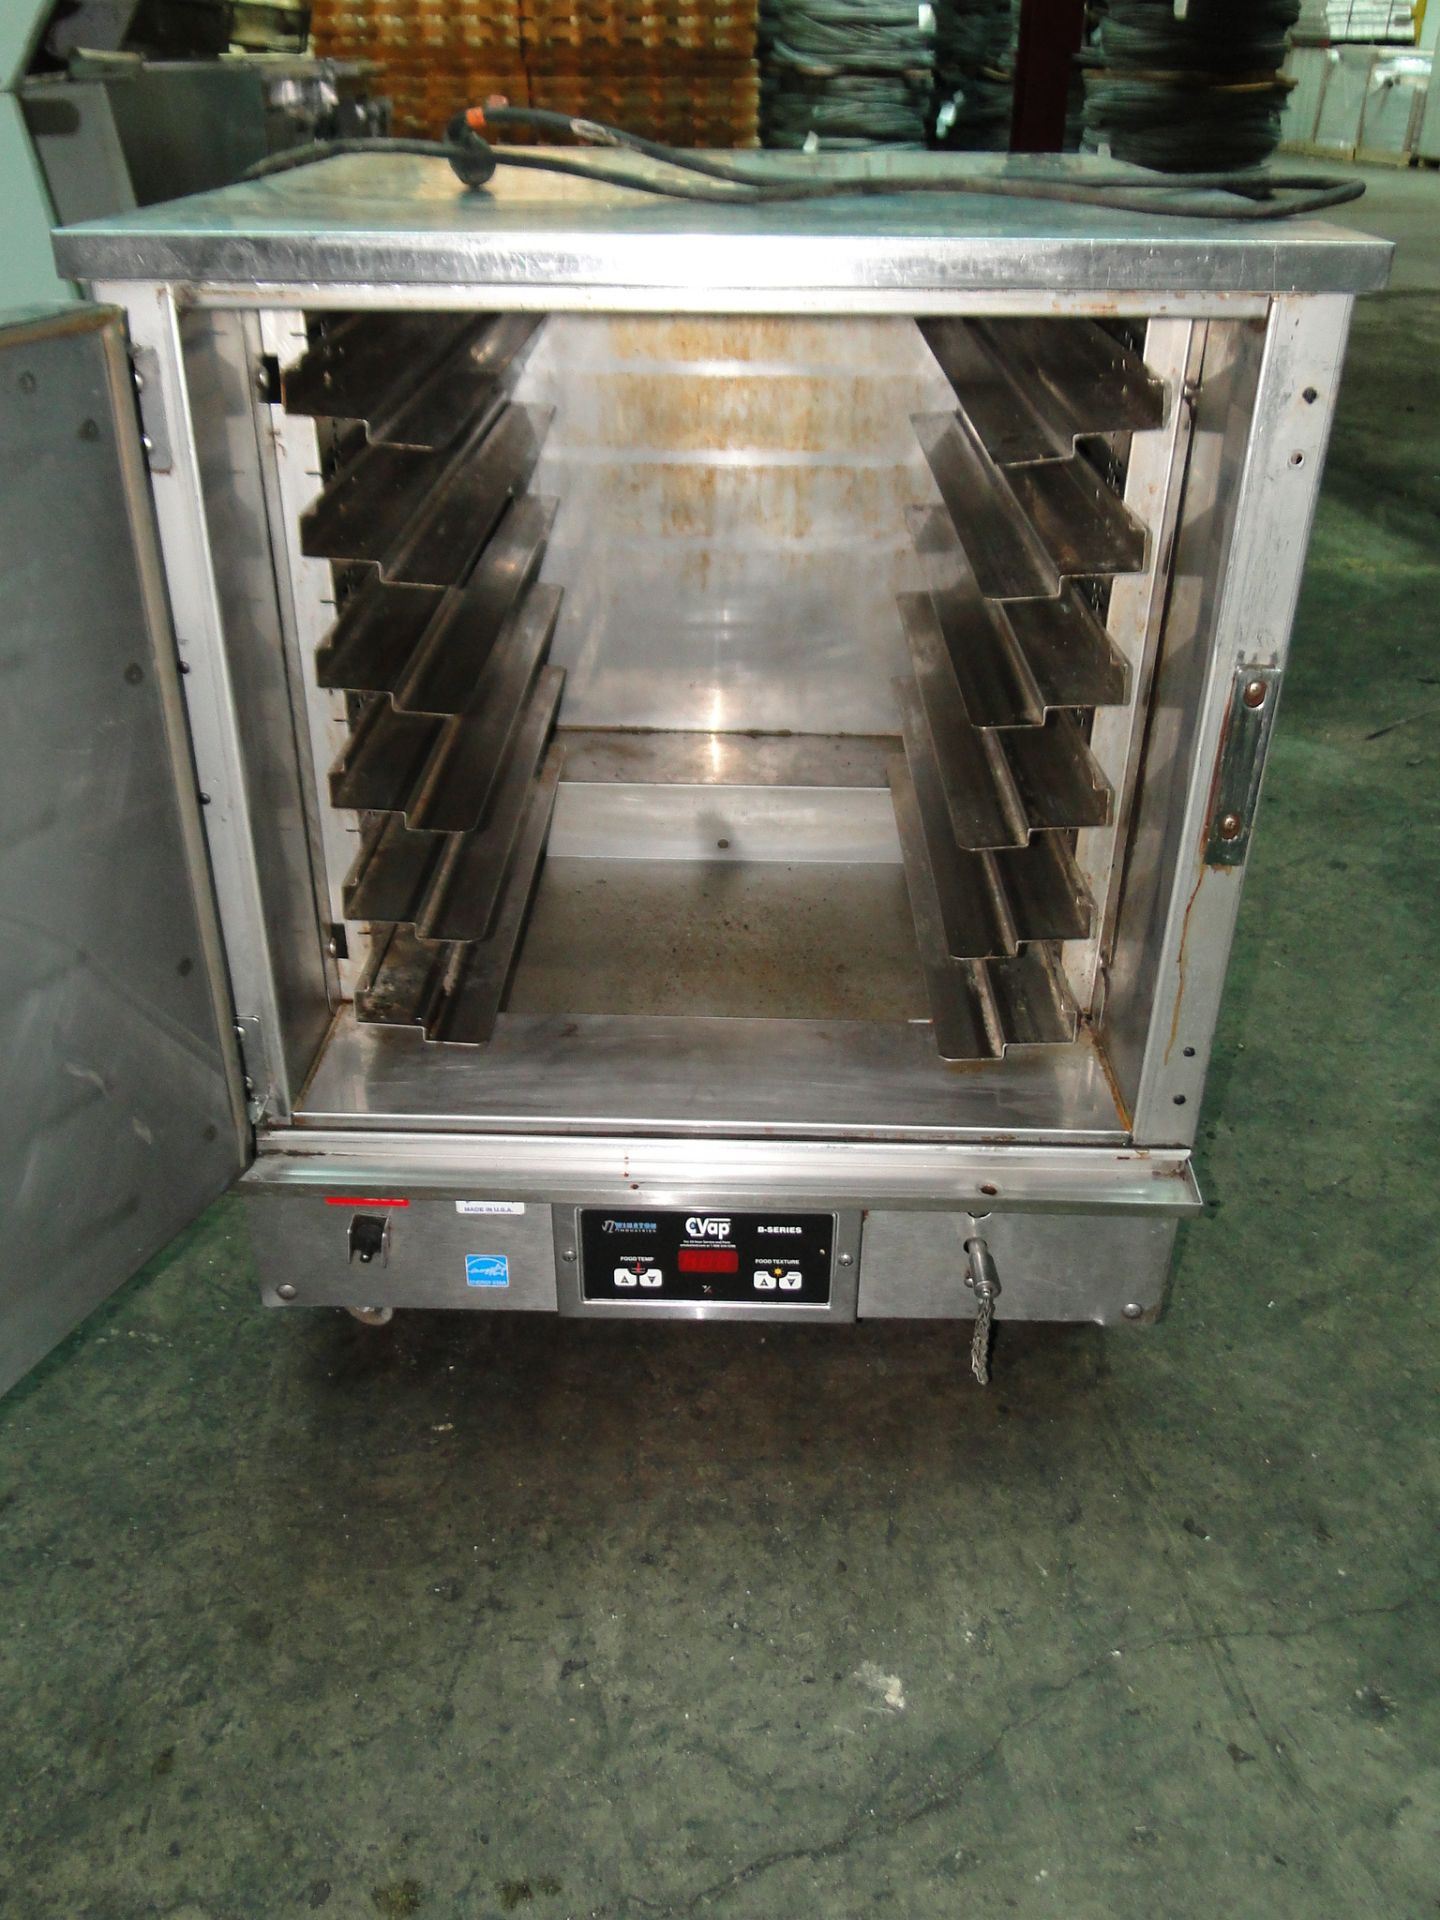 Winston "6 Tray" Electric Heat Hold / Warming Cabinet, Model HC4009GE, S/N: 20071016-02, 120 Volt - Image 3 of 4